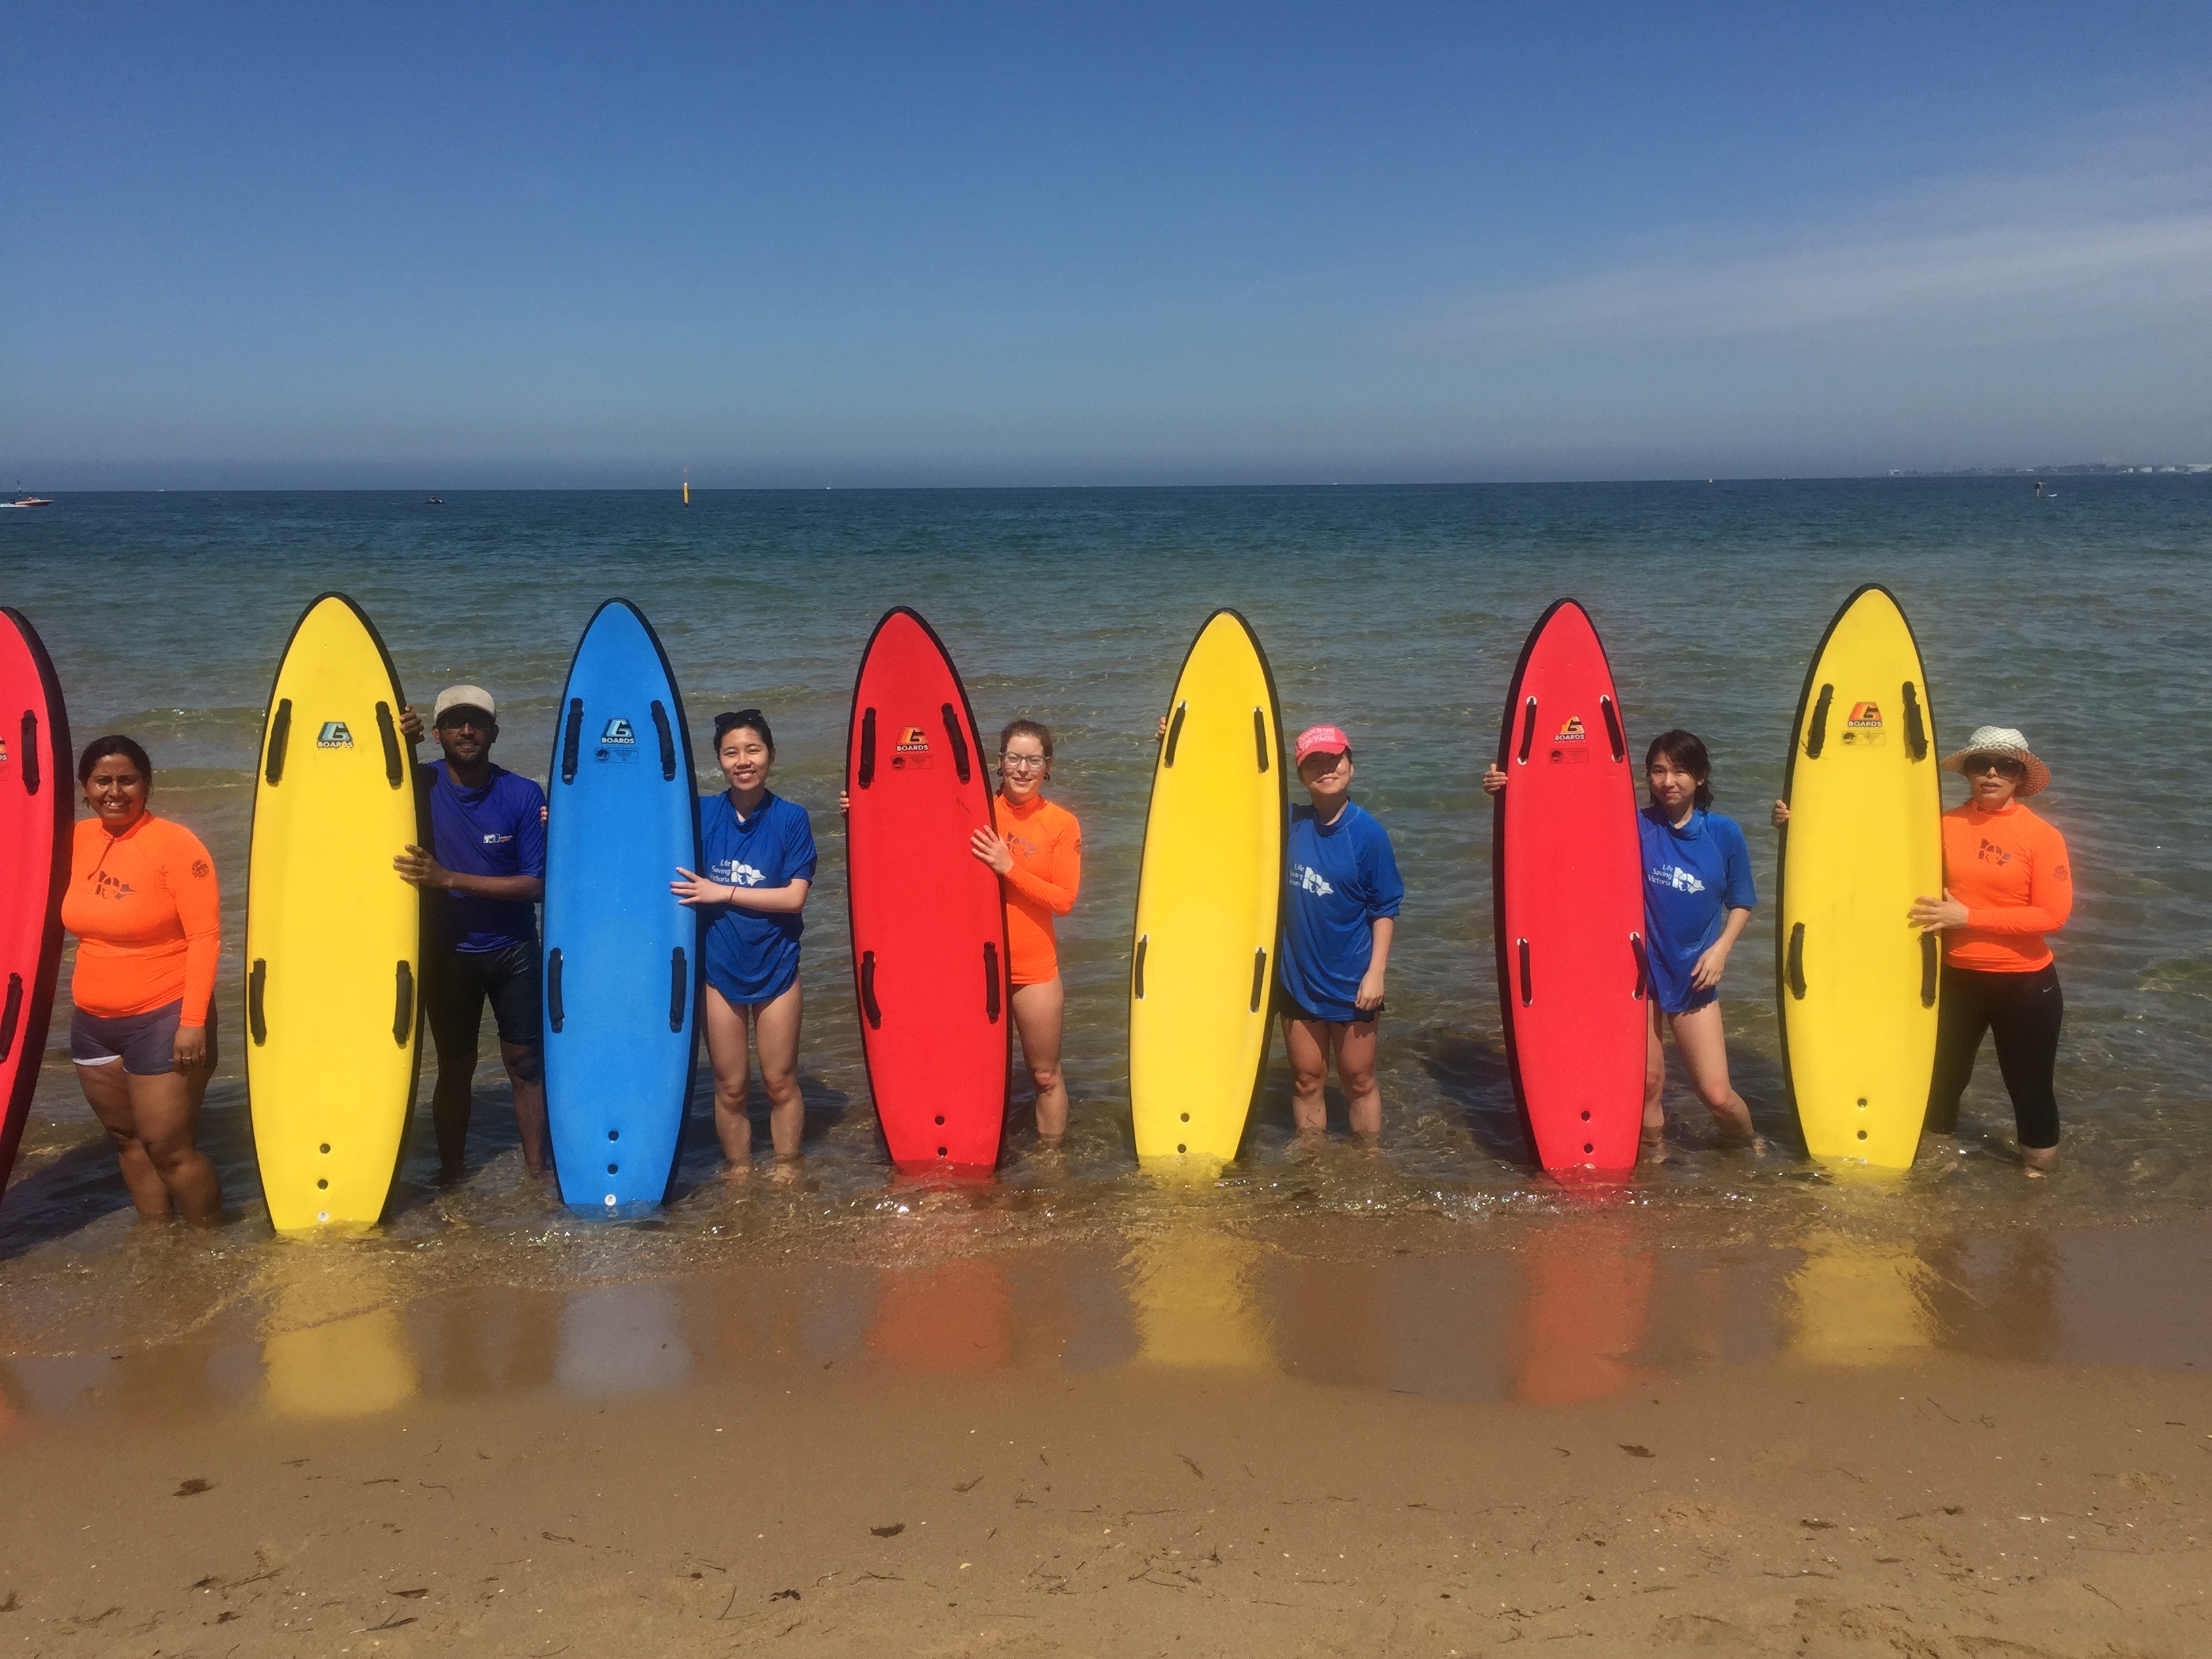 University of Melbourne students hit the beach